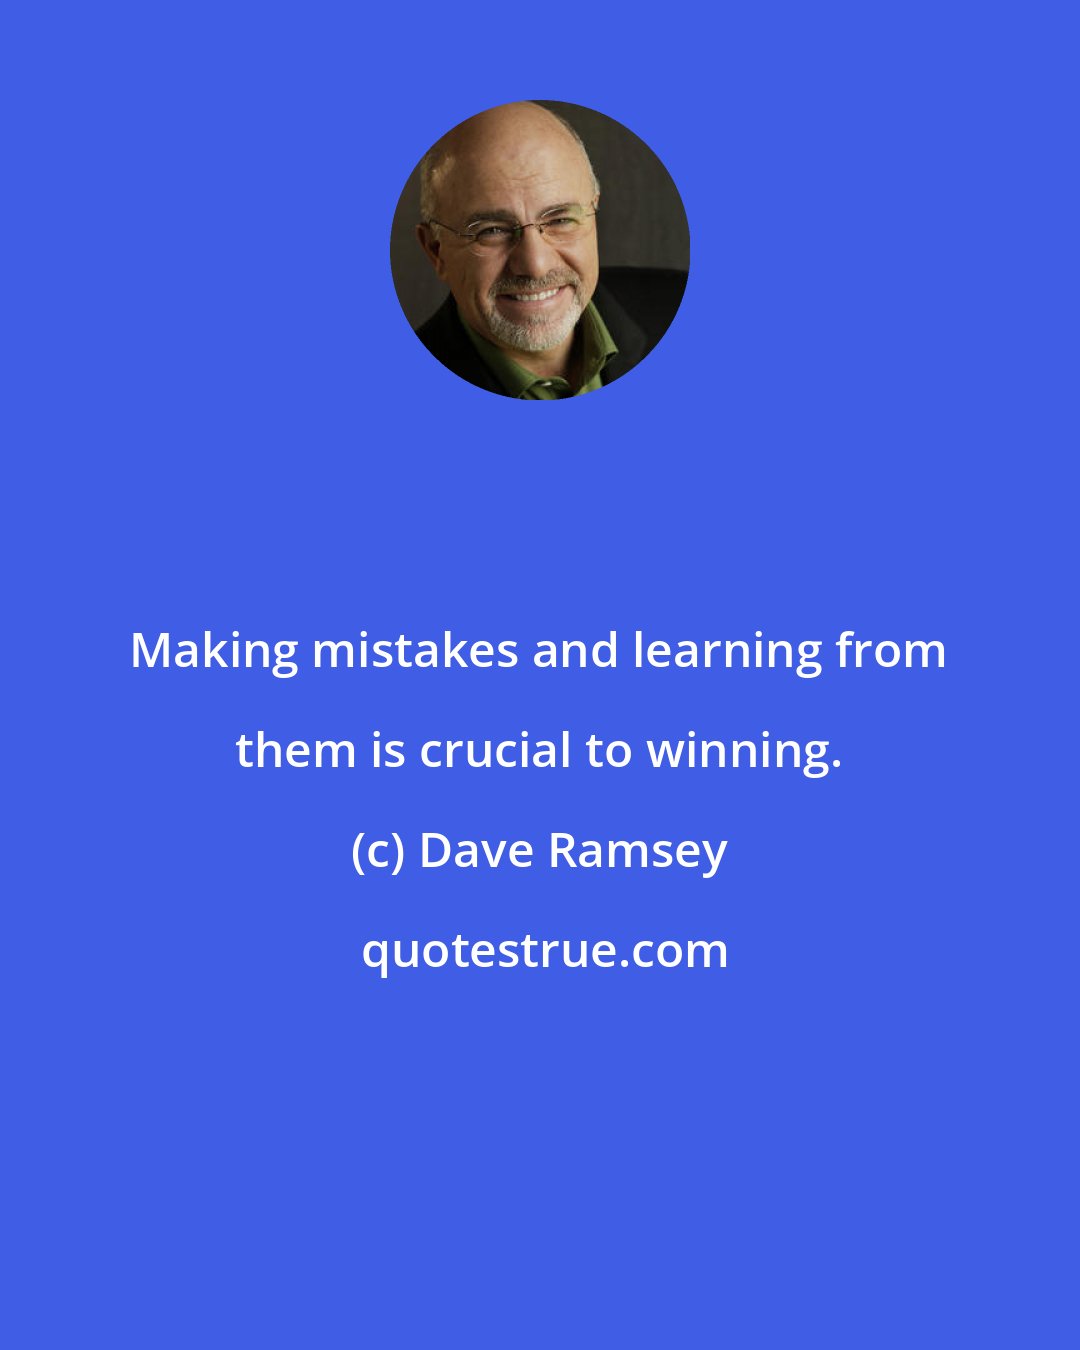 Dave Ramsey: Making mistakes and learning from them is crucial to winning.